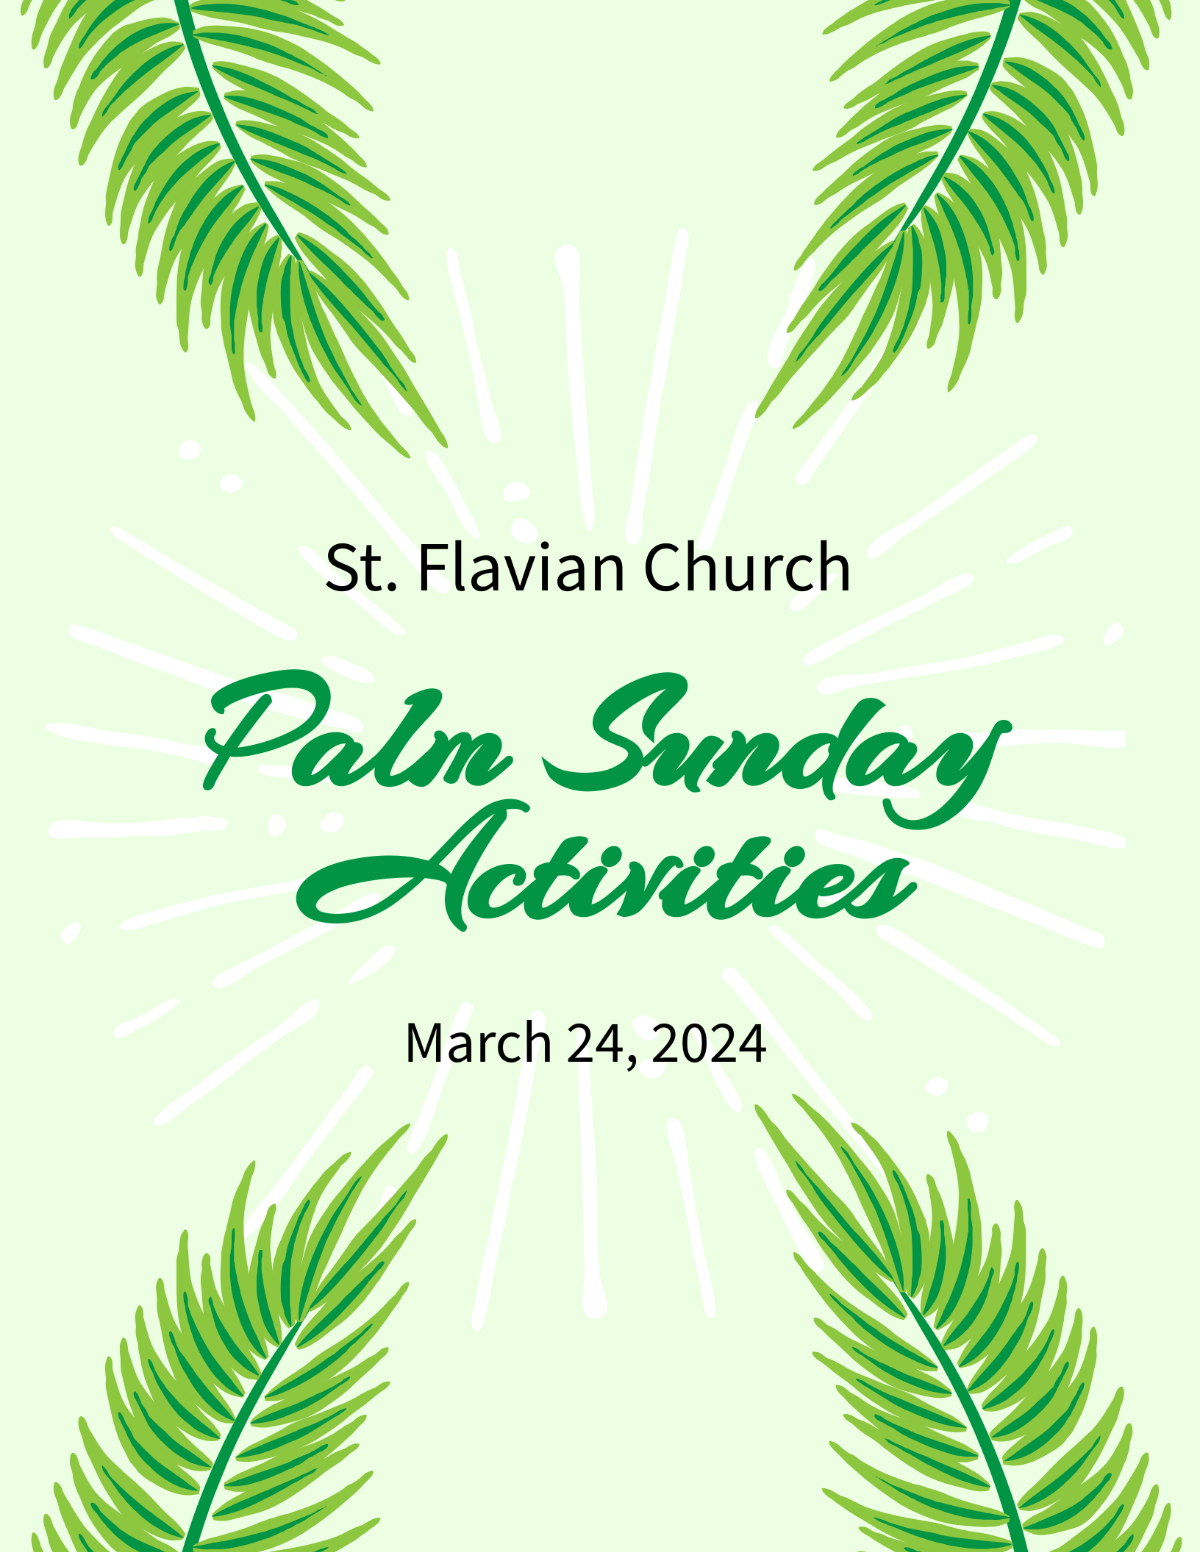 Free PalmSunday Event Flyer Template